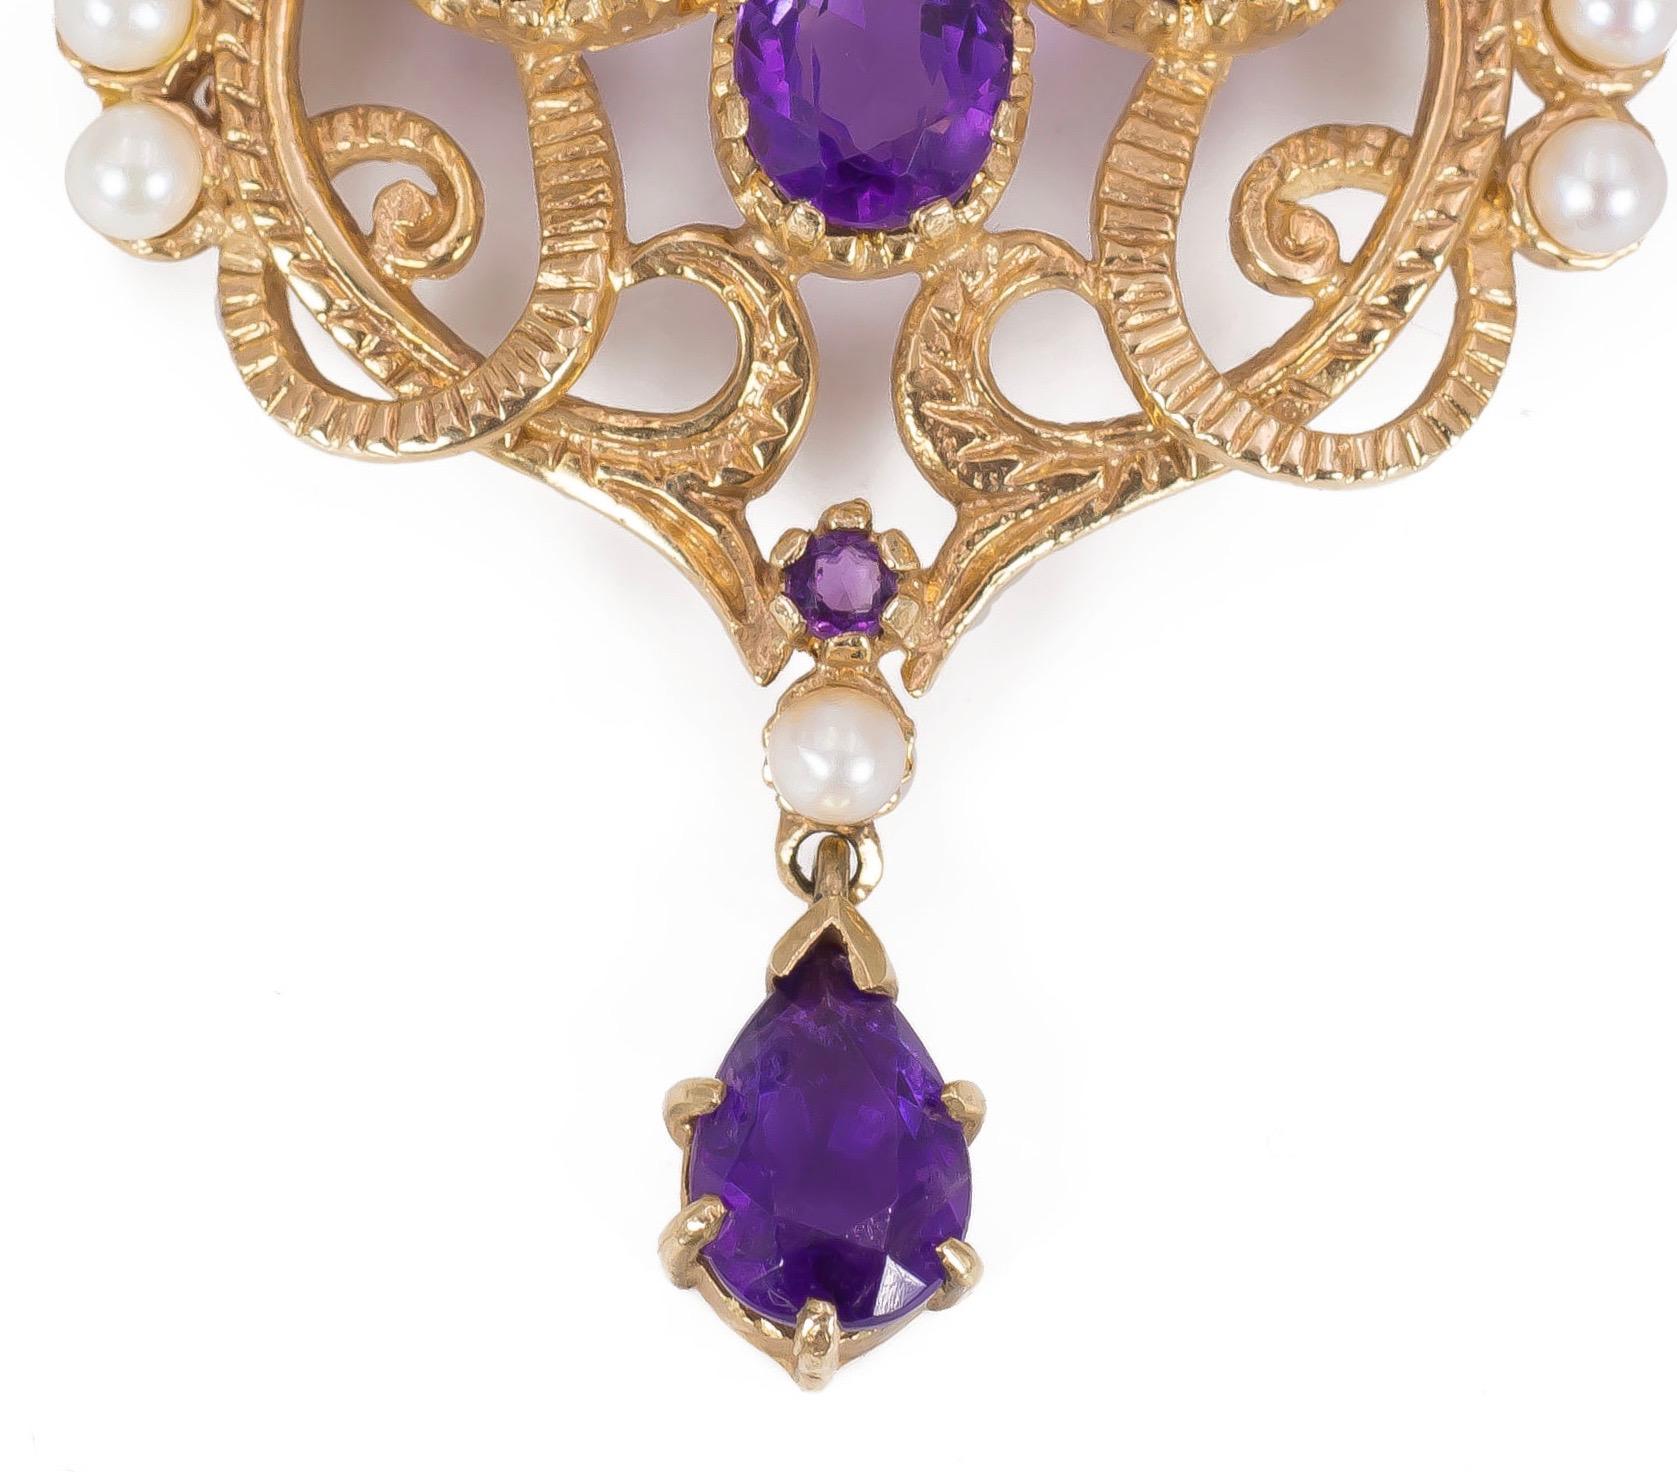 Antique 9 Karat Gold, Amethyst and Bead Brooch, Early 1900 In Good Condition For Sale In Bologna, IT